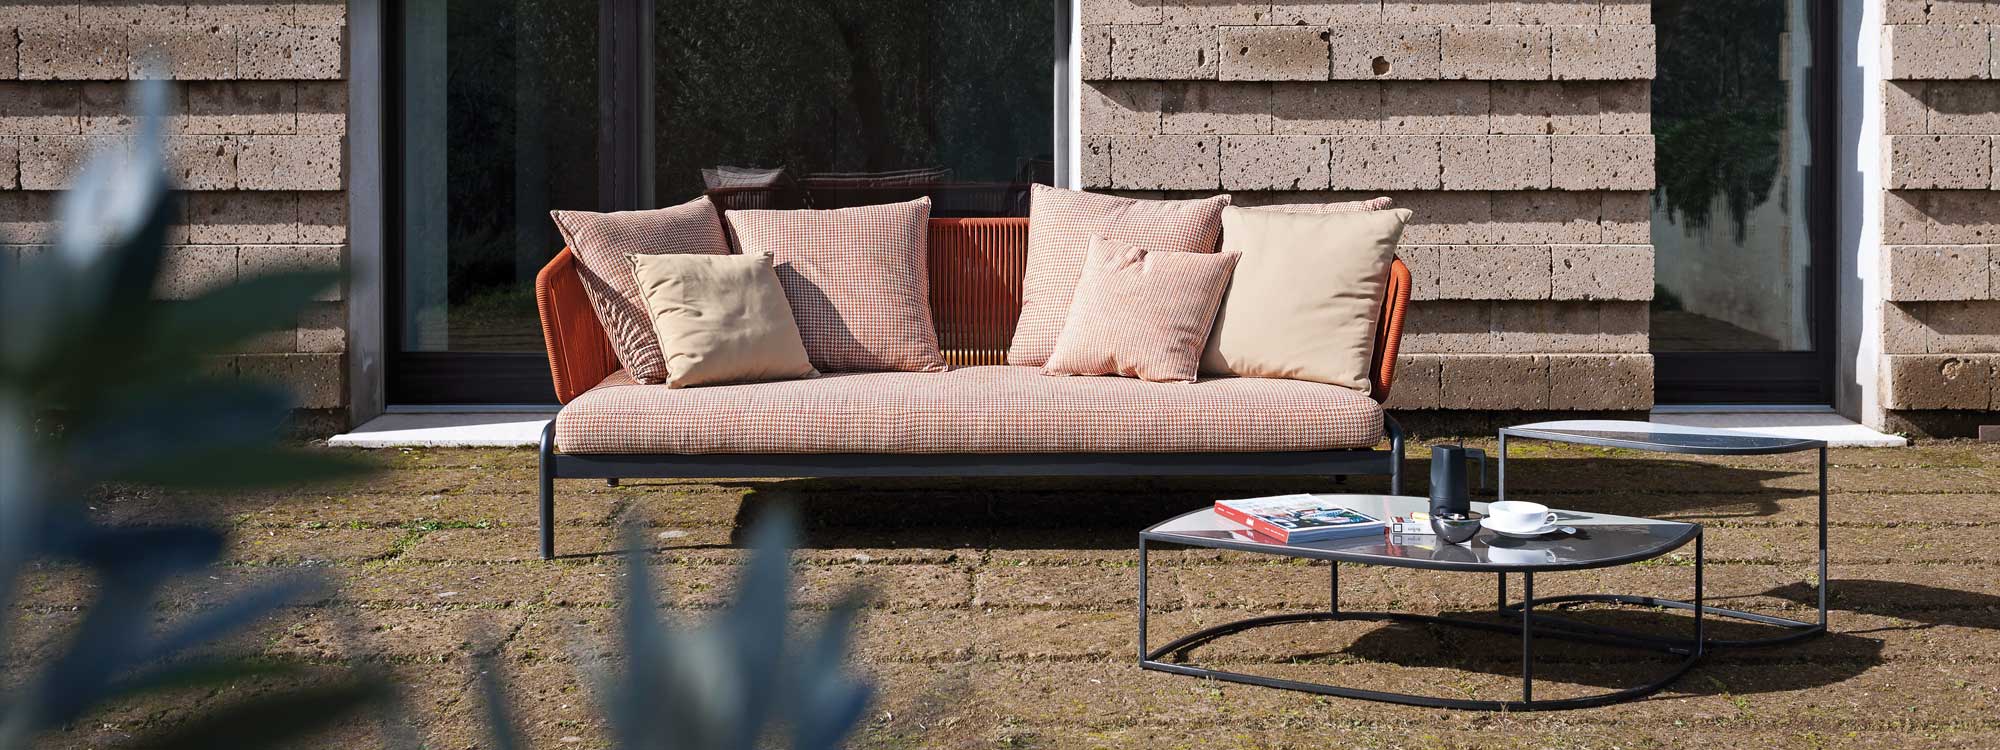 Image of RODA Spool orange garden sofa with white and orange cushions, together with Leaf minimalist outdoor low tables on sunny terrace